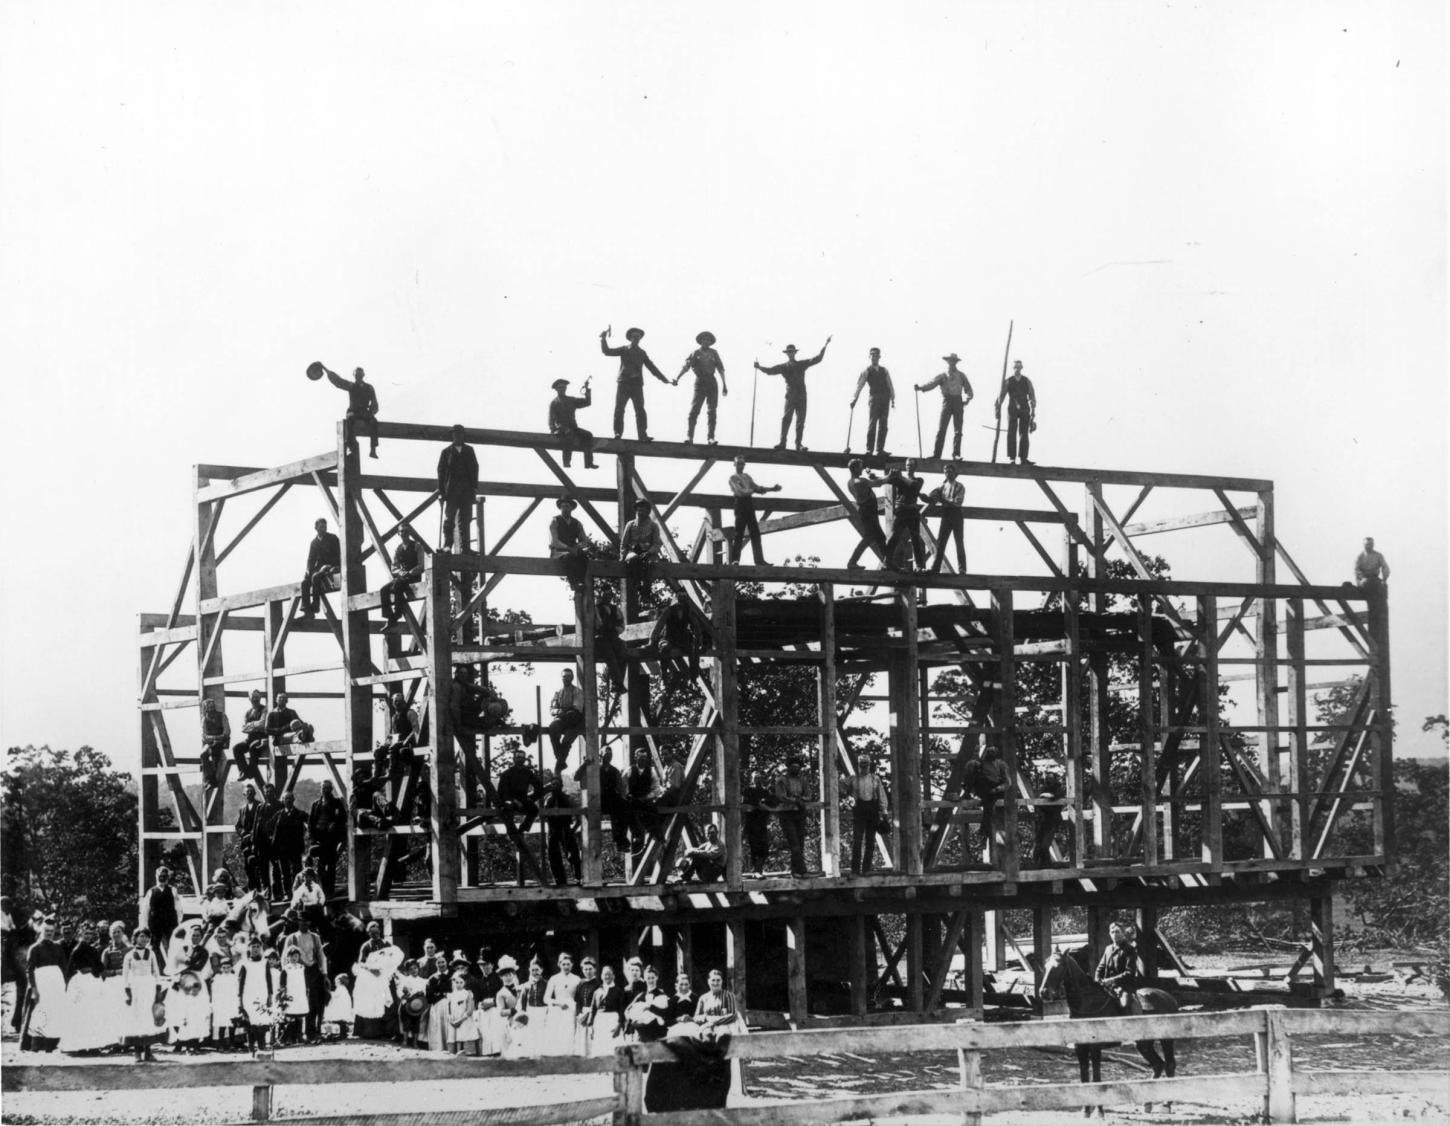 Image: Rohr Barn Raising, 1888, from the collection of The Massillon Museum